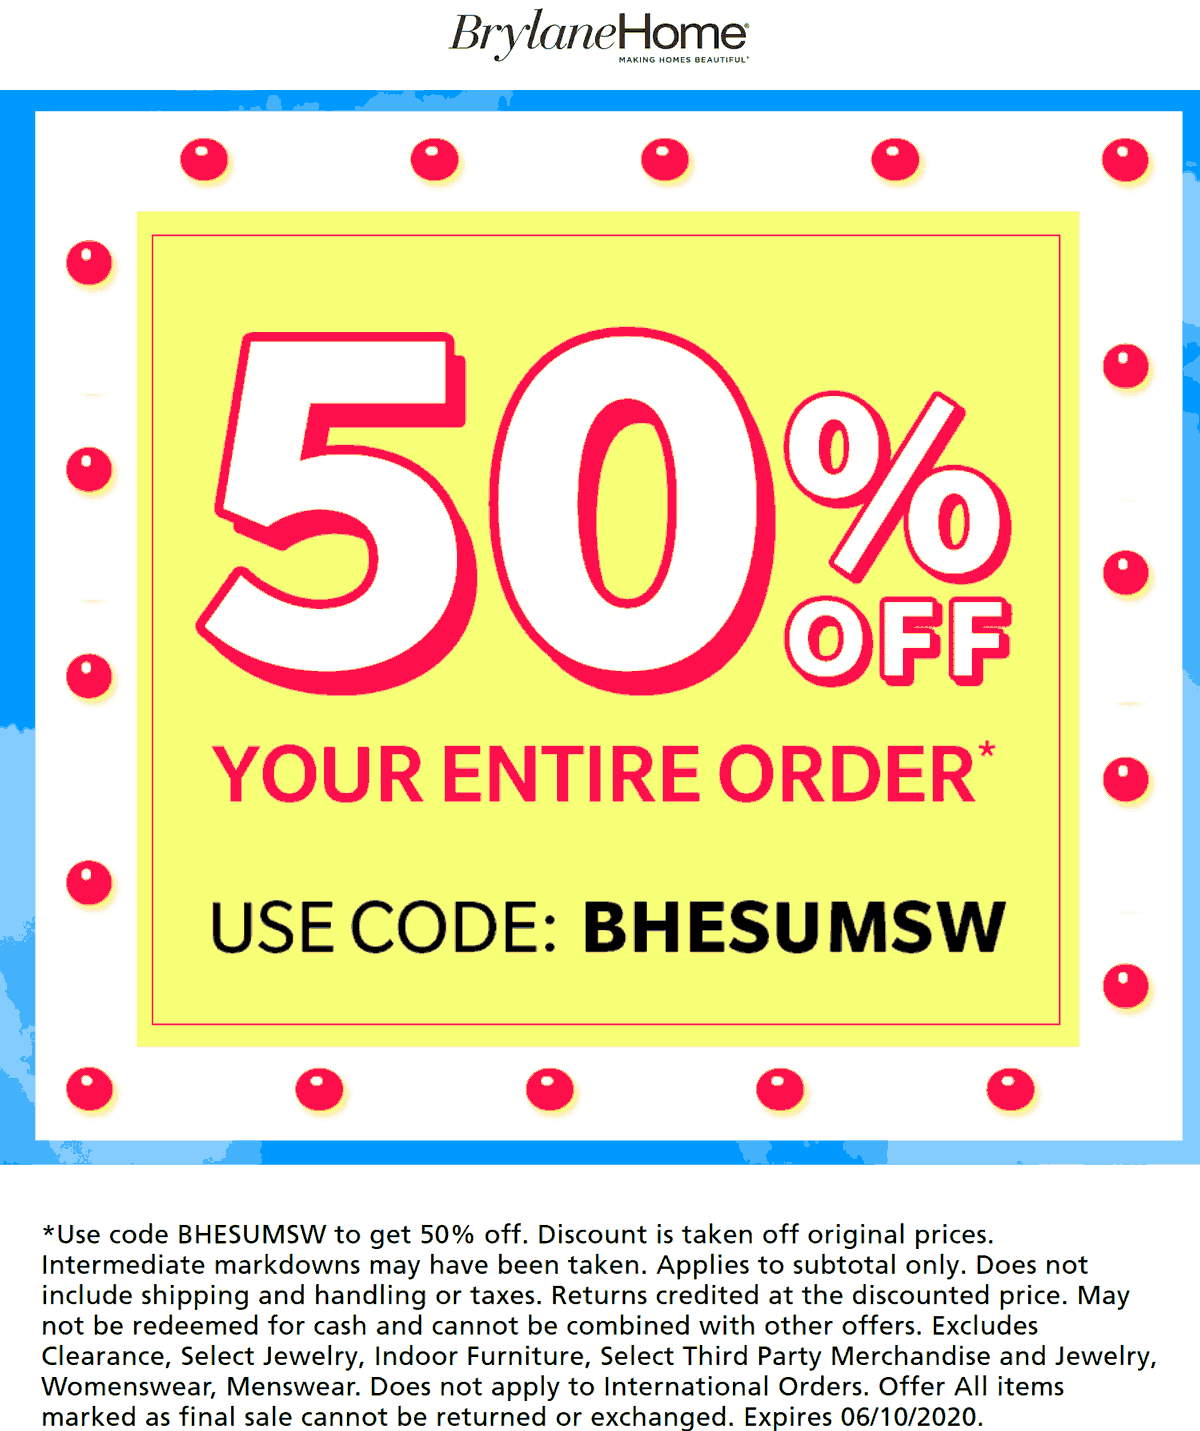 Brylane Home stores Coupon  50% off everything at Brylane Home catalog via promo code BHESUMSW #brylanehome